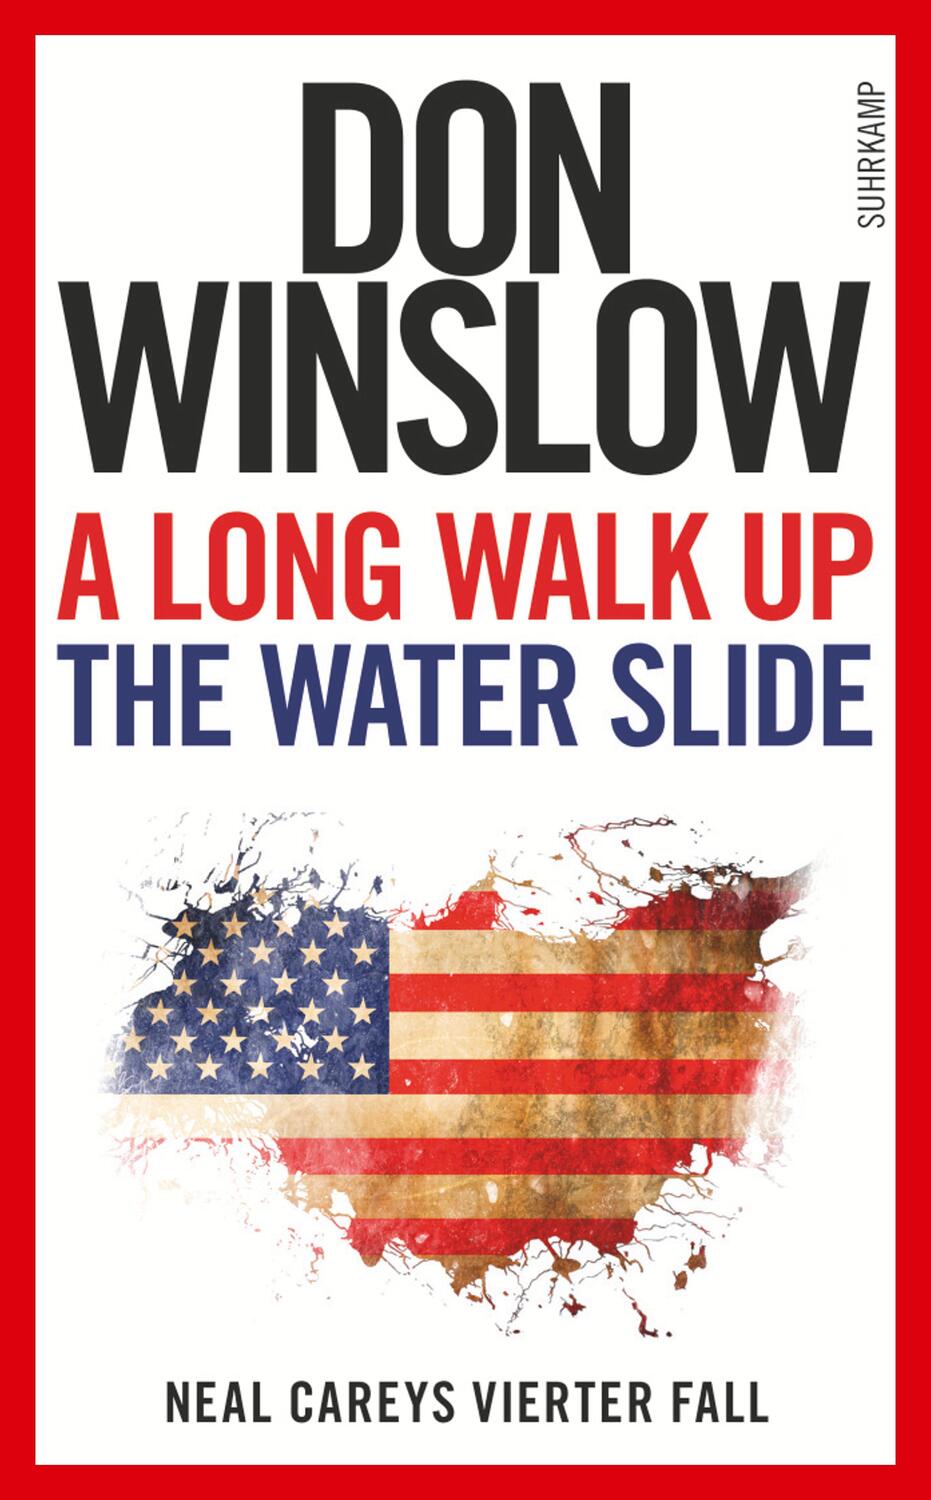 Cover: 9783518465837 | A Long Walk Up the Water Slide | Neal Careys vierter Fall | Winslow